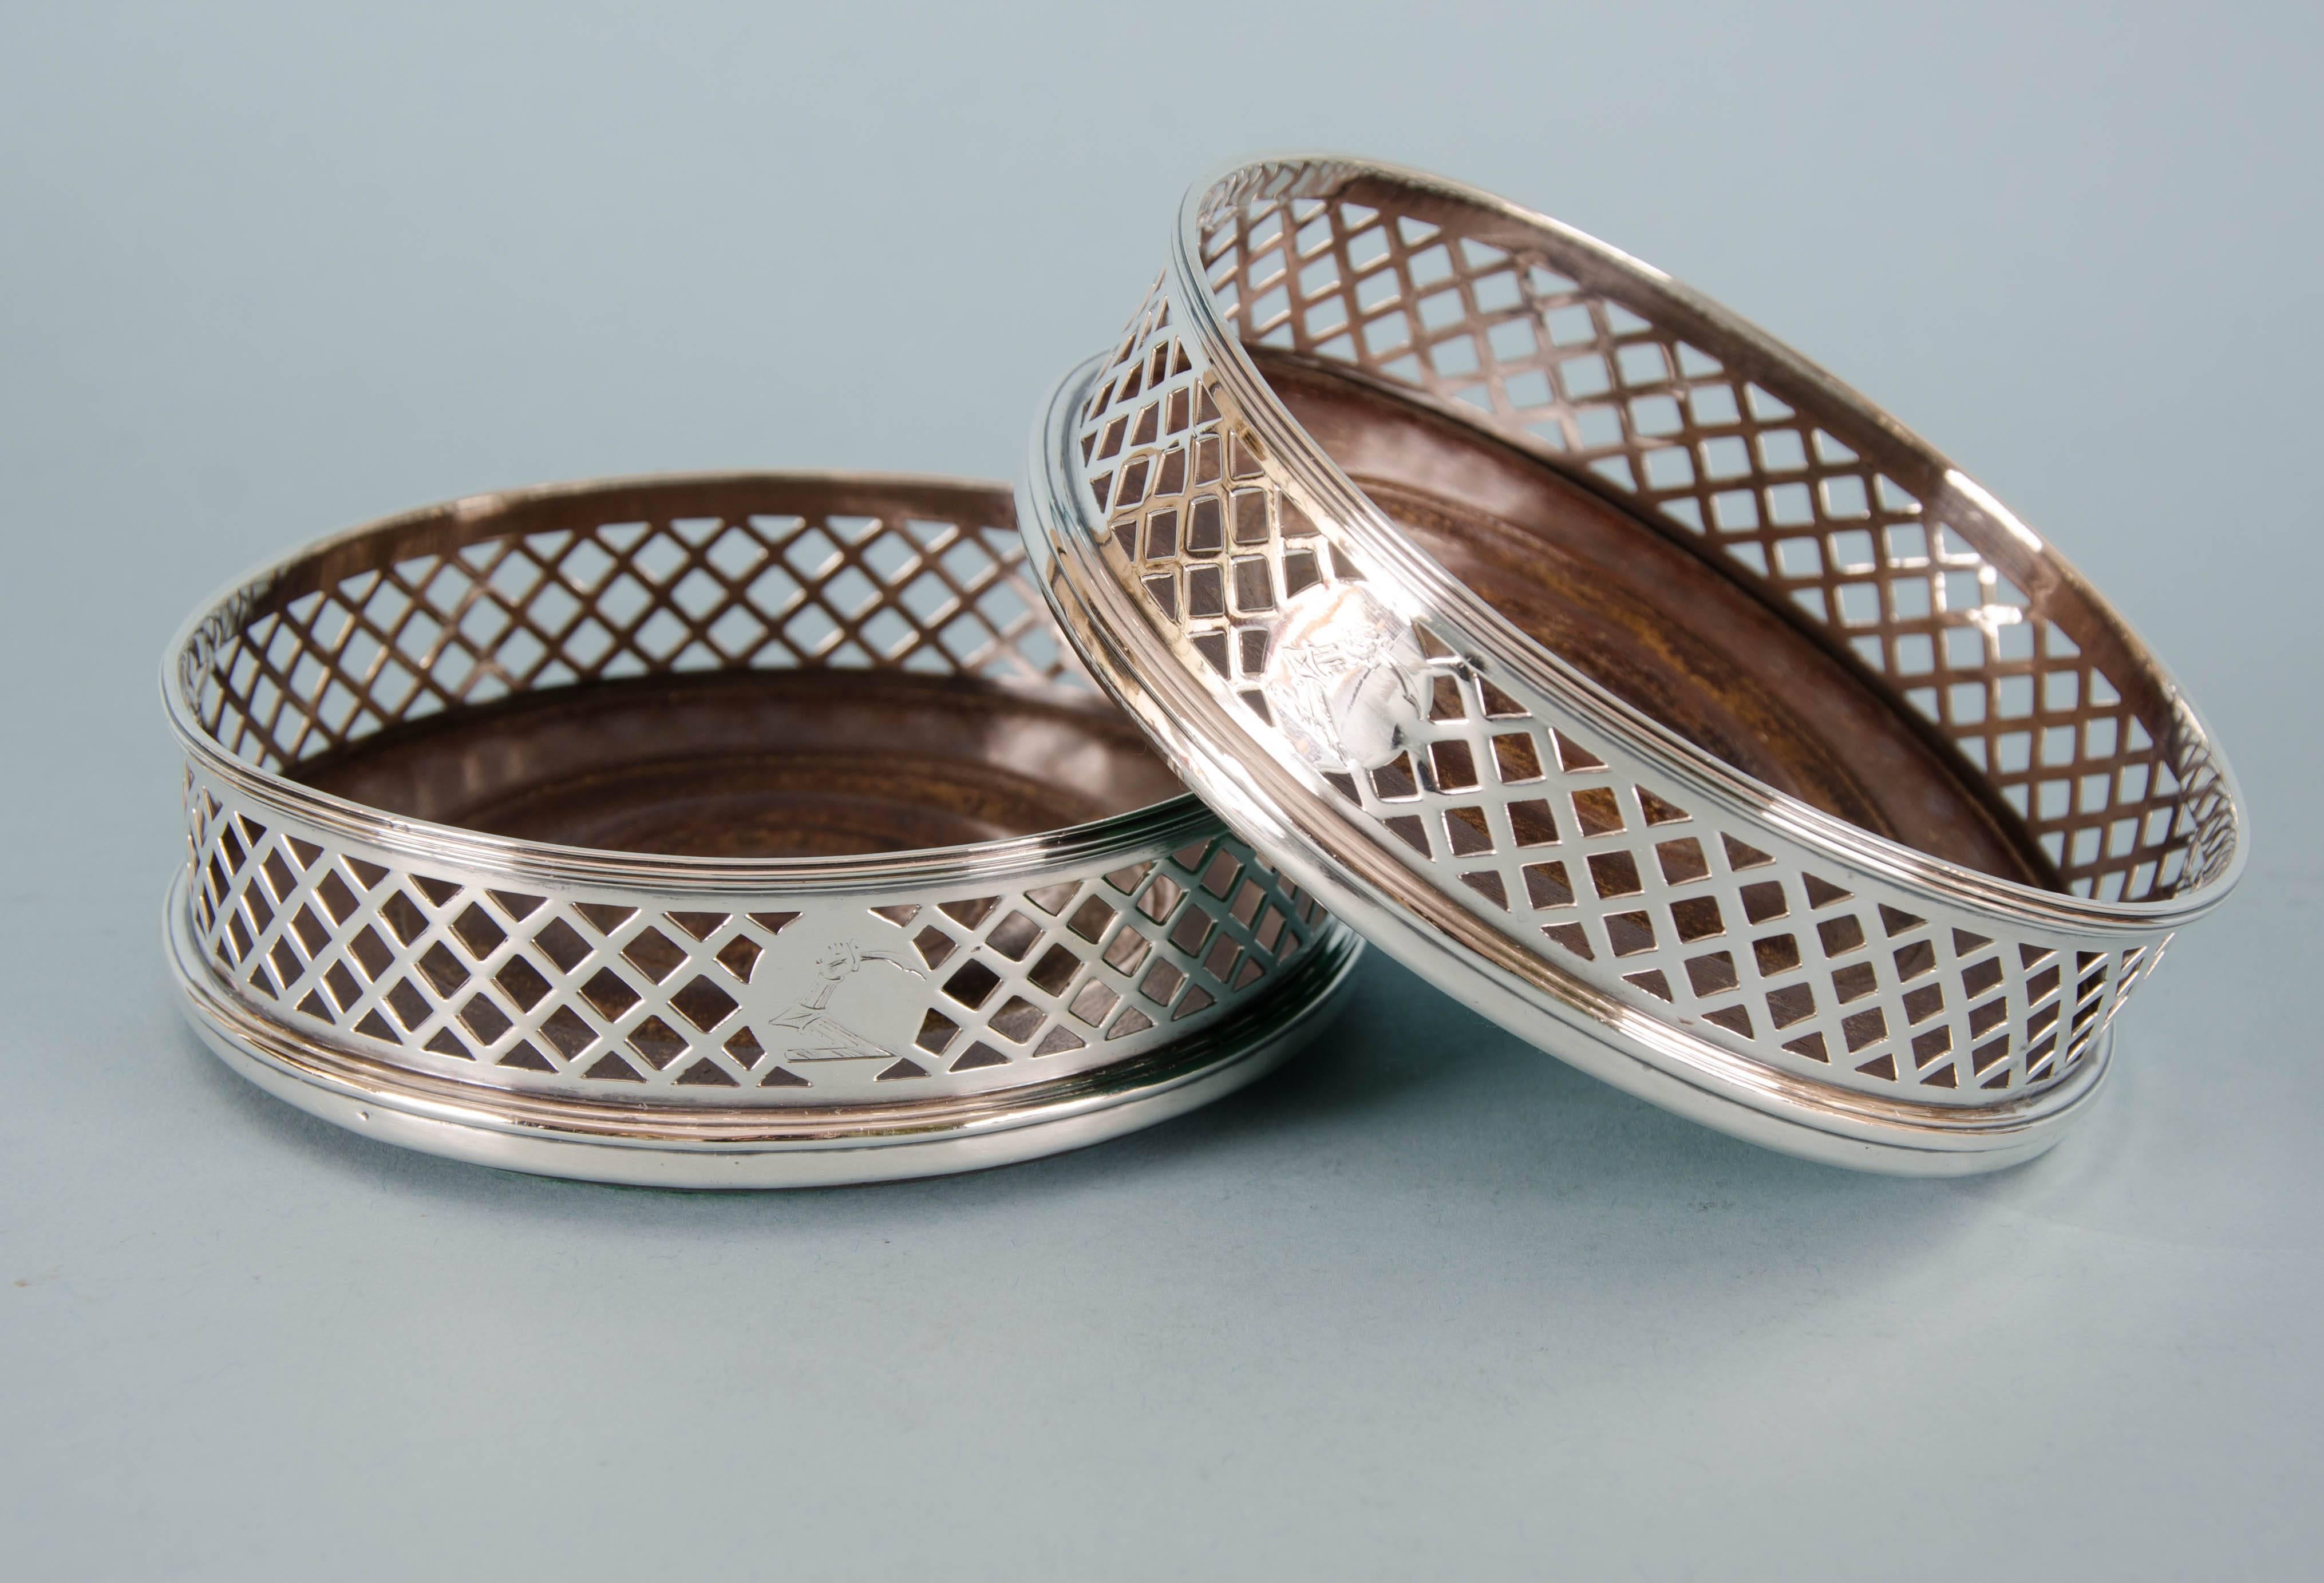 Smart pair of well made George III pierced-sided sterling silver wine coasters.
Made by Michael Plummer in London in 1797.
The sides of the coasters are pierced in lattice pattern with a solid silver disk on one side of each coaster on which is